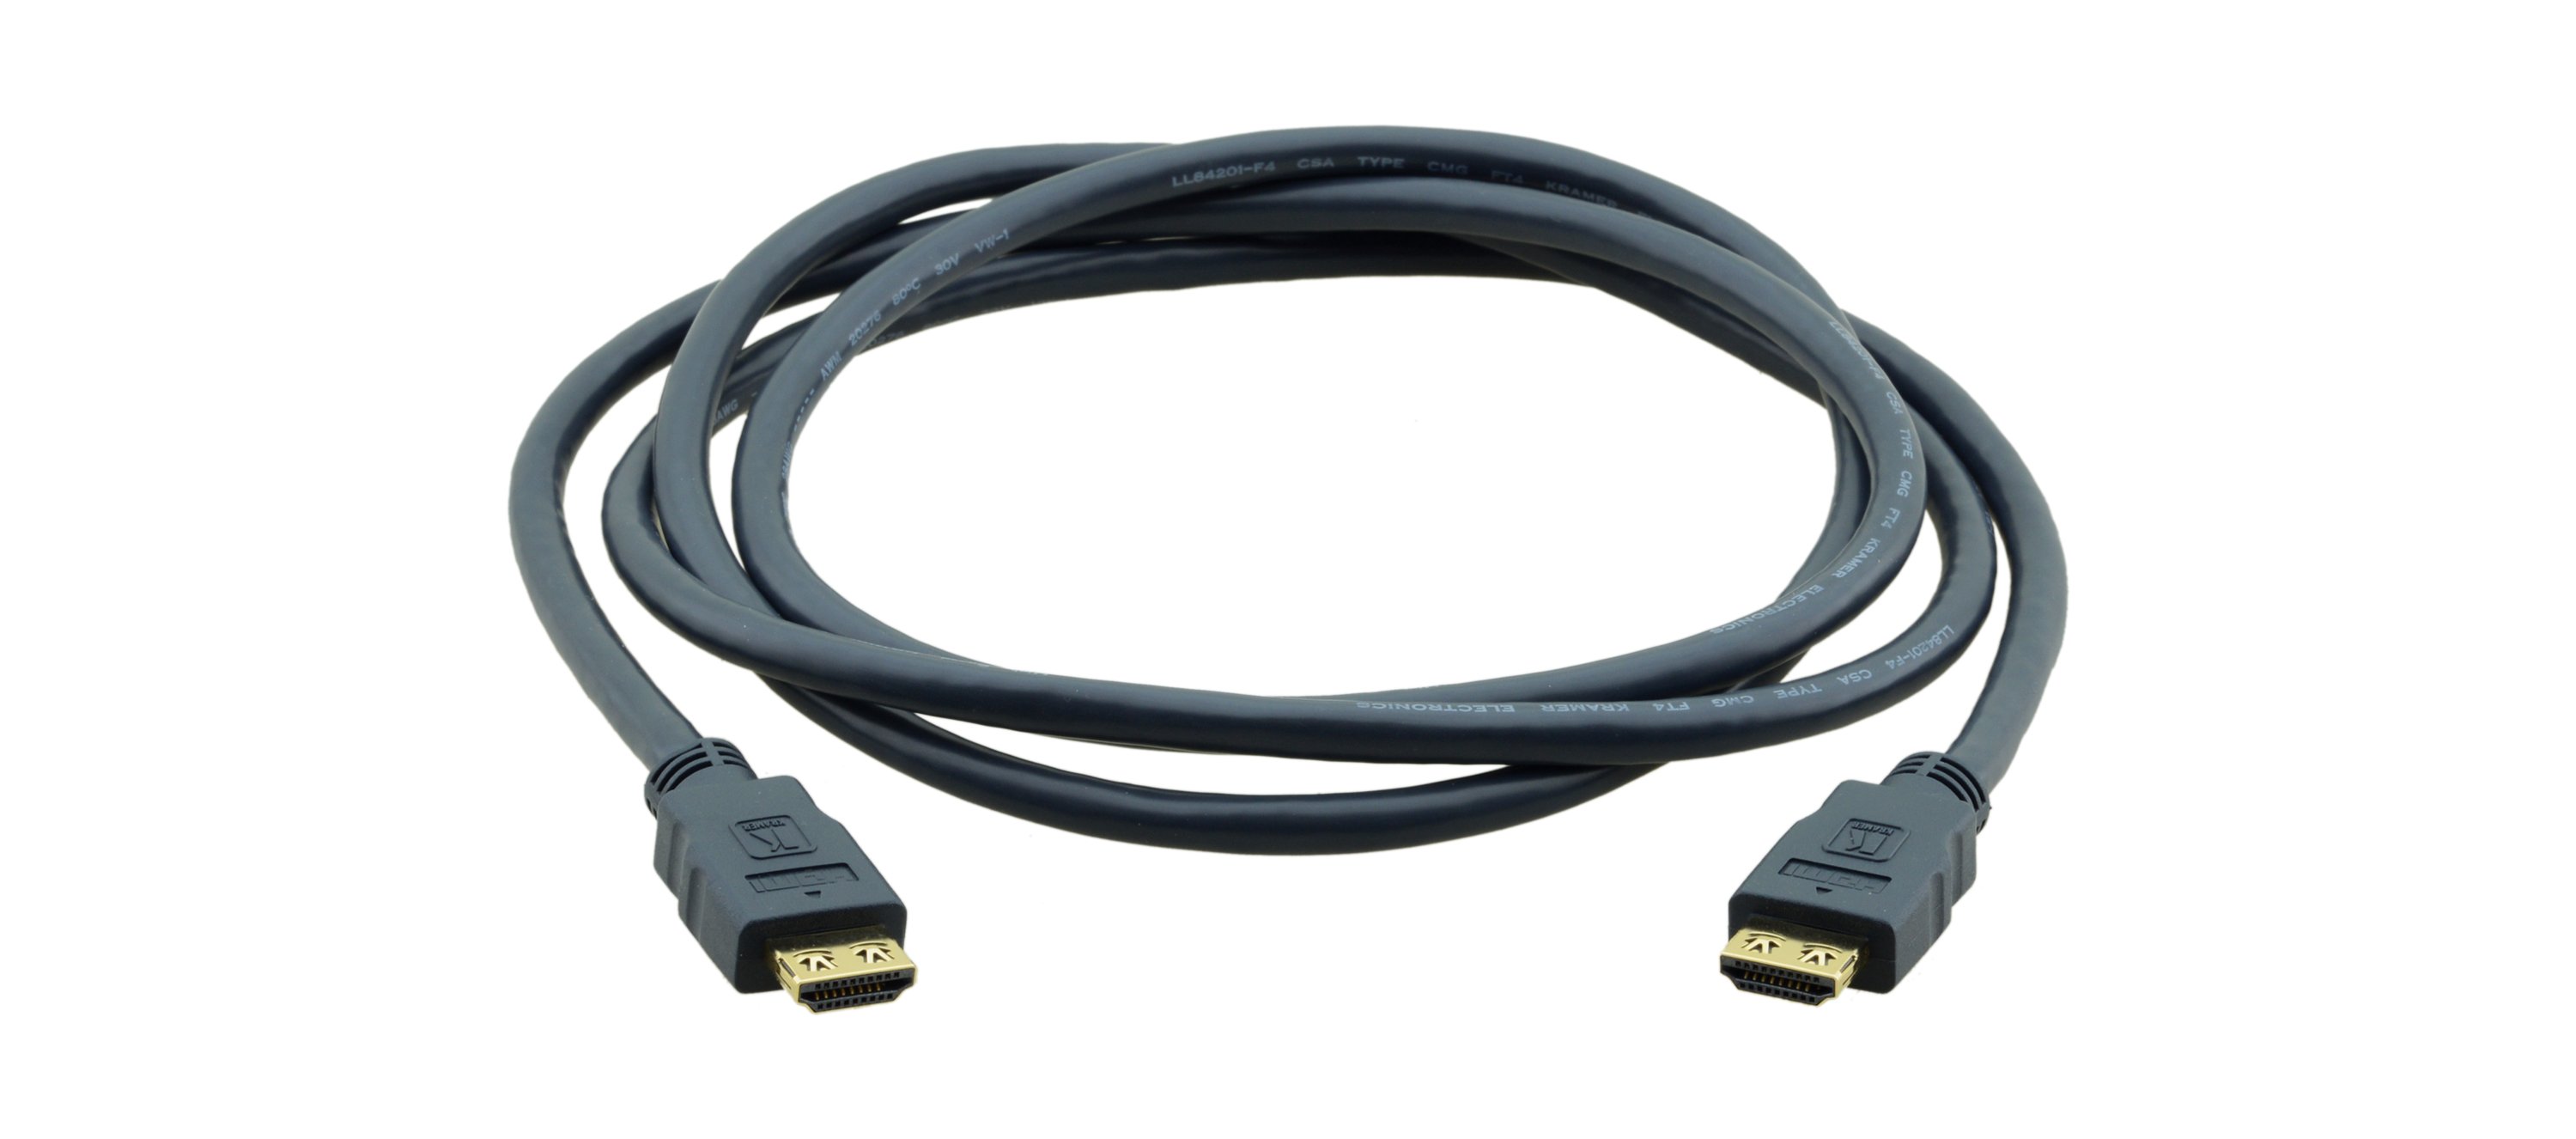 Plenum Rated Cable with Ethernet CP-HM/HM/ETH-15 M Kramer Electronics HDMI M to HDMI 